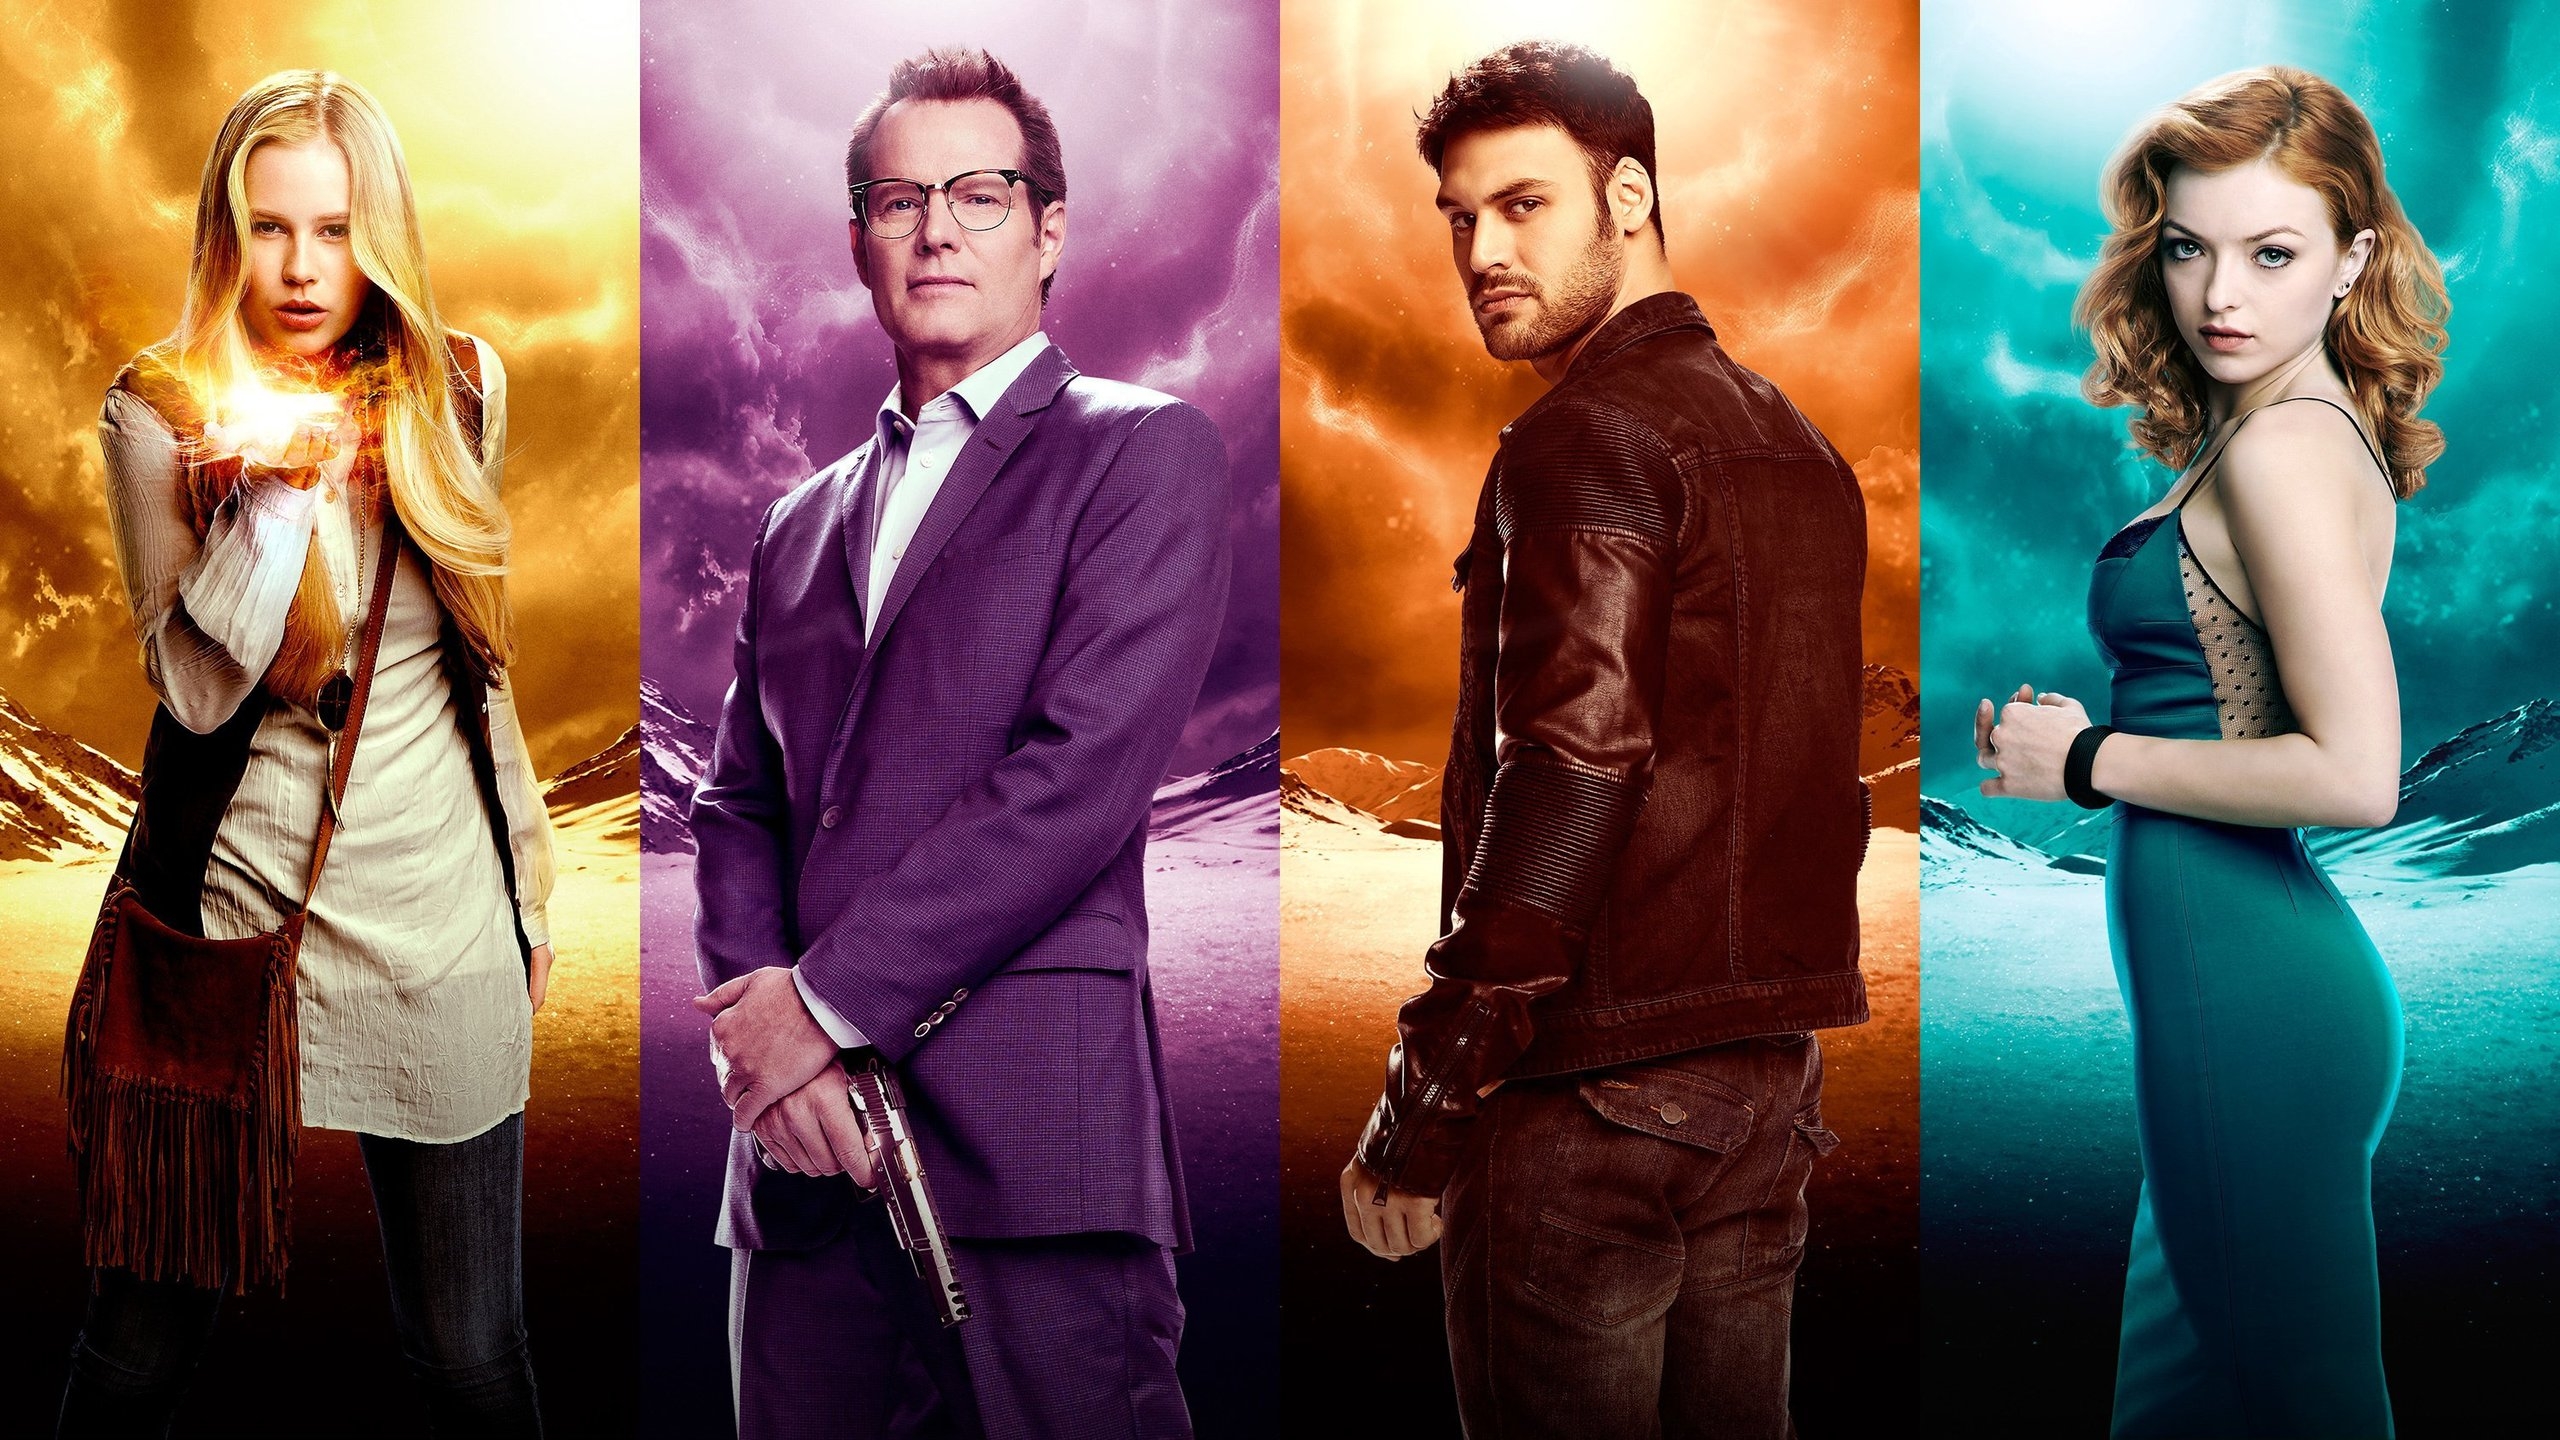 Heroes Reborn Cast for 2560x1440 HDTV resolution